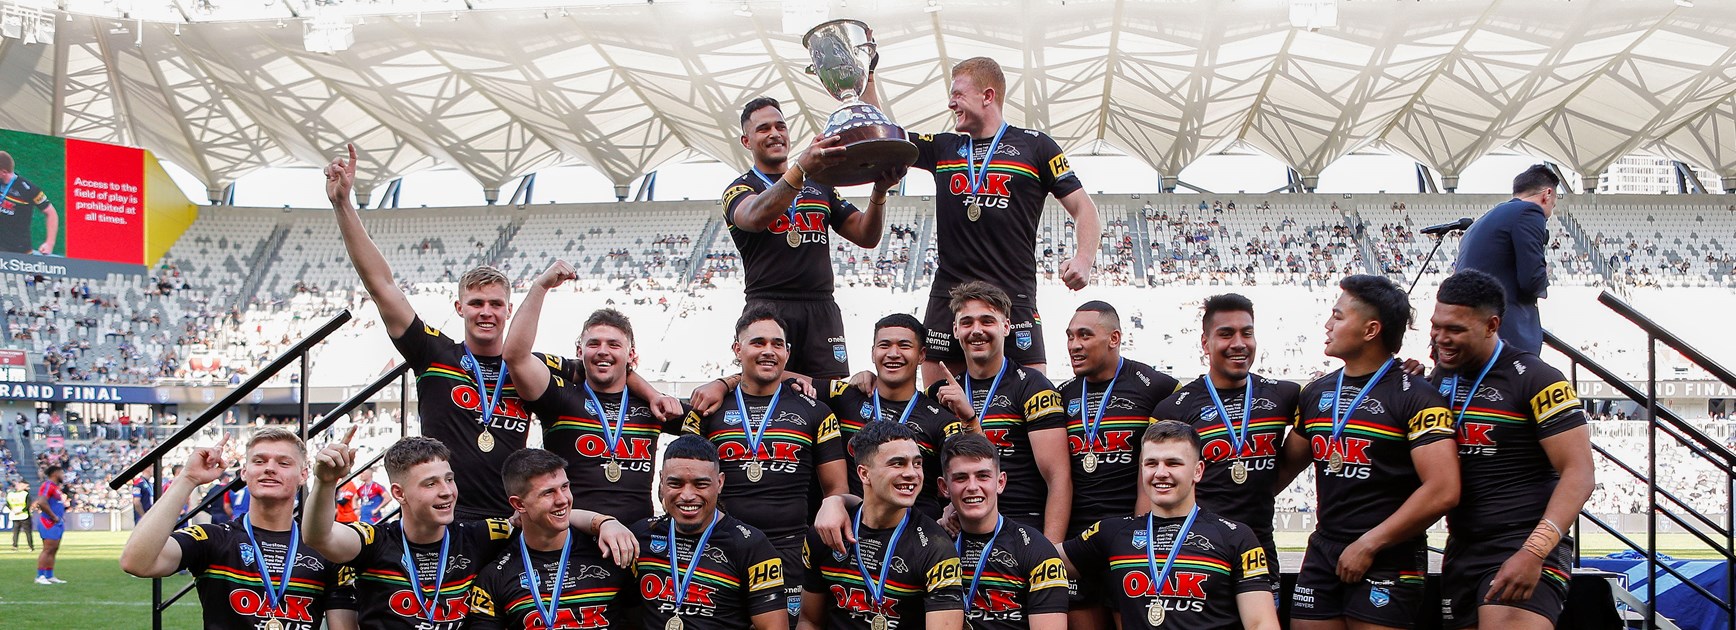 Panthers snatch Golden Point win to claim Jersey Flegg Cup